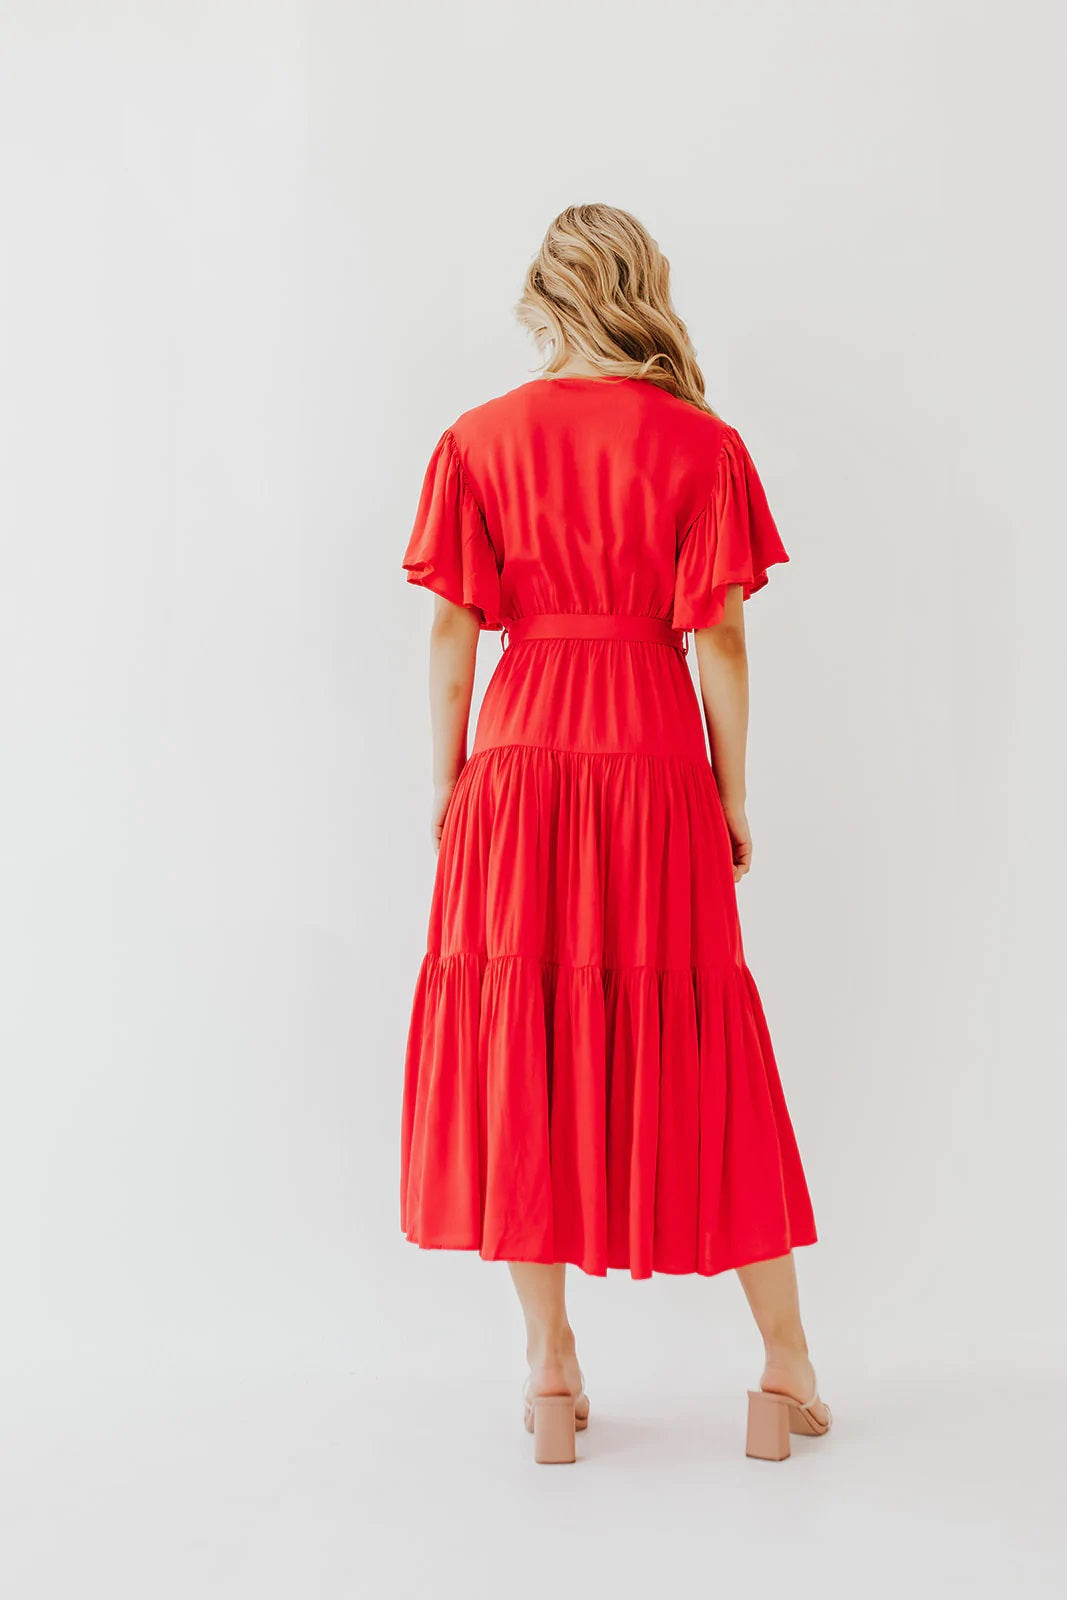 The Milan Maxi Dress (Red) - Delta Swanky Girl